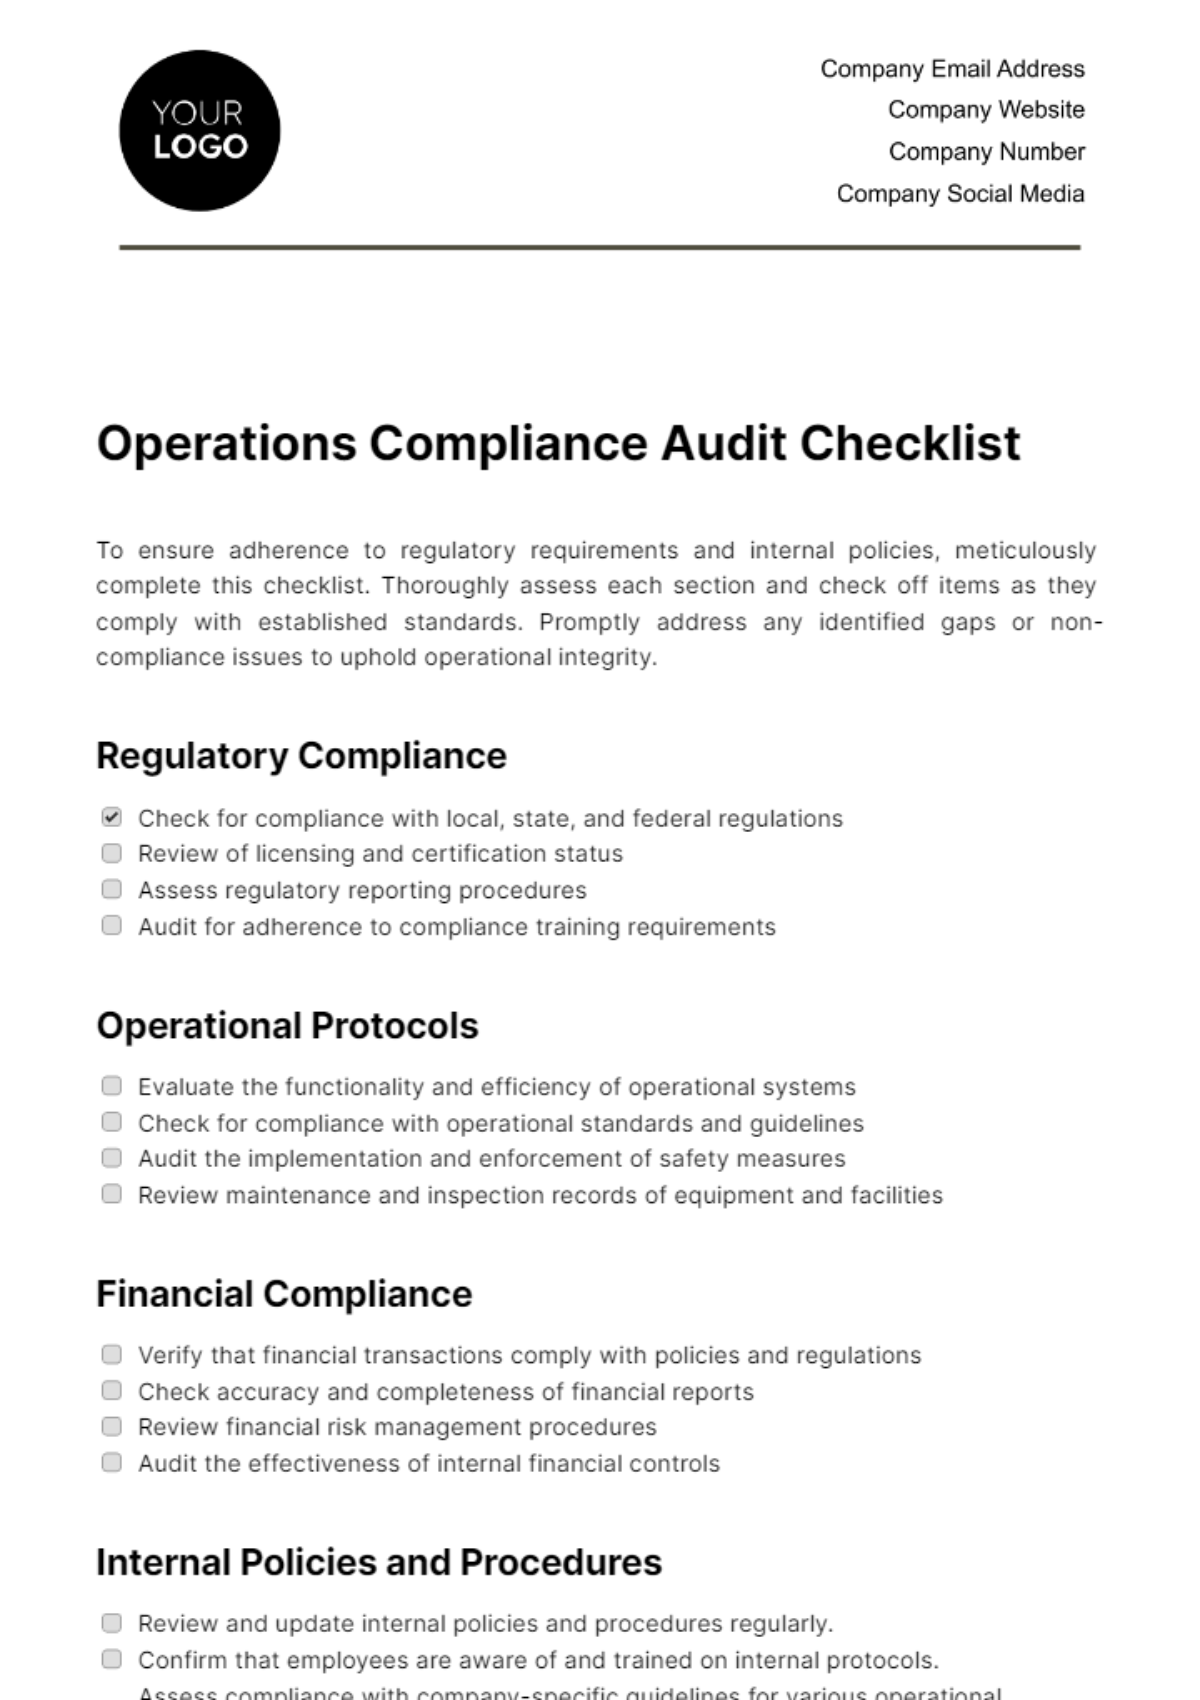 Free Operations Compliance Audit Checklist Template